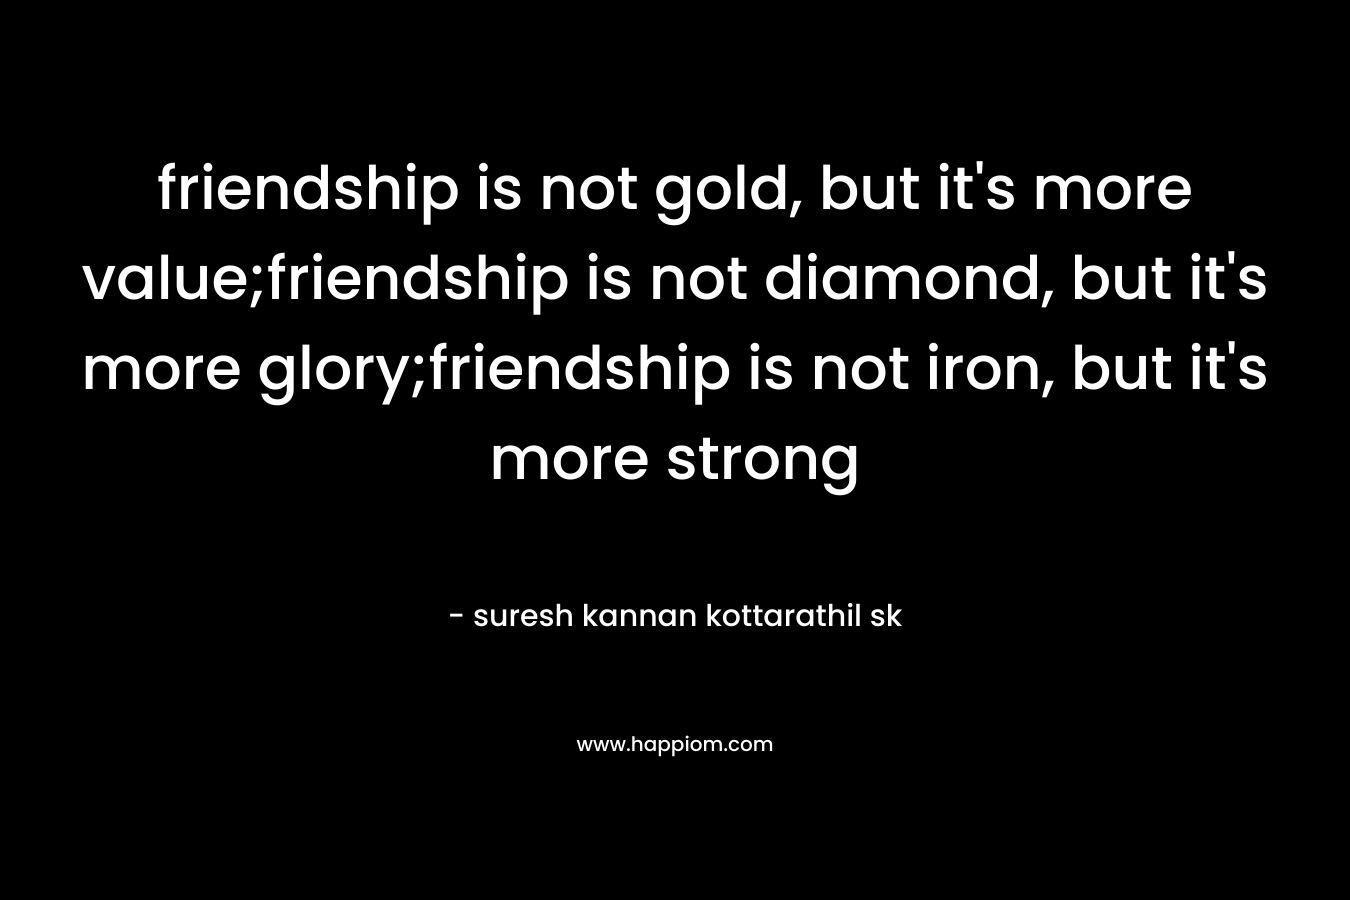 friendship is not gold, but it's more value;friendship is not diamond, but it's more glory;friendship is not iron, but it's more strong